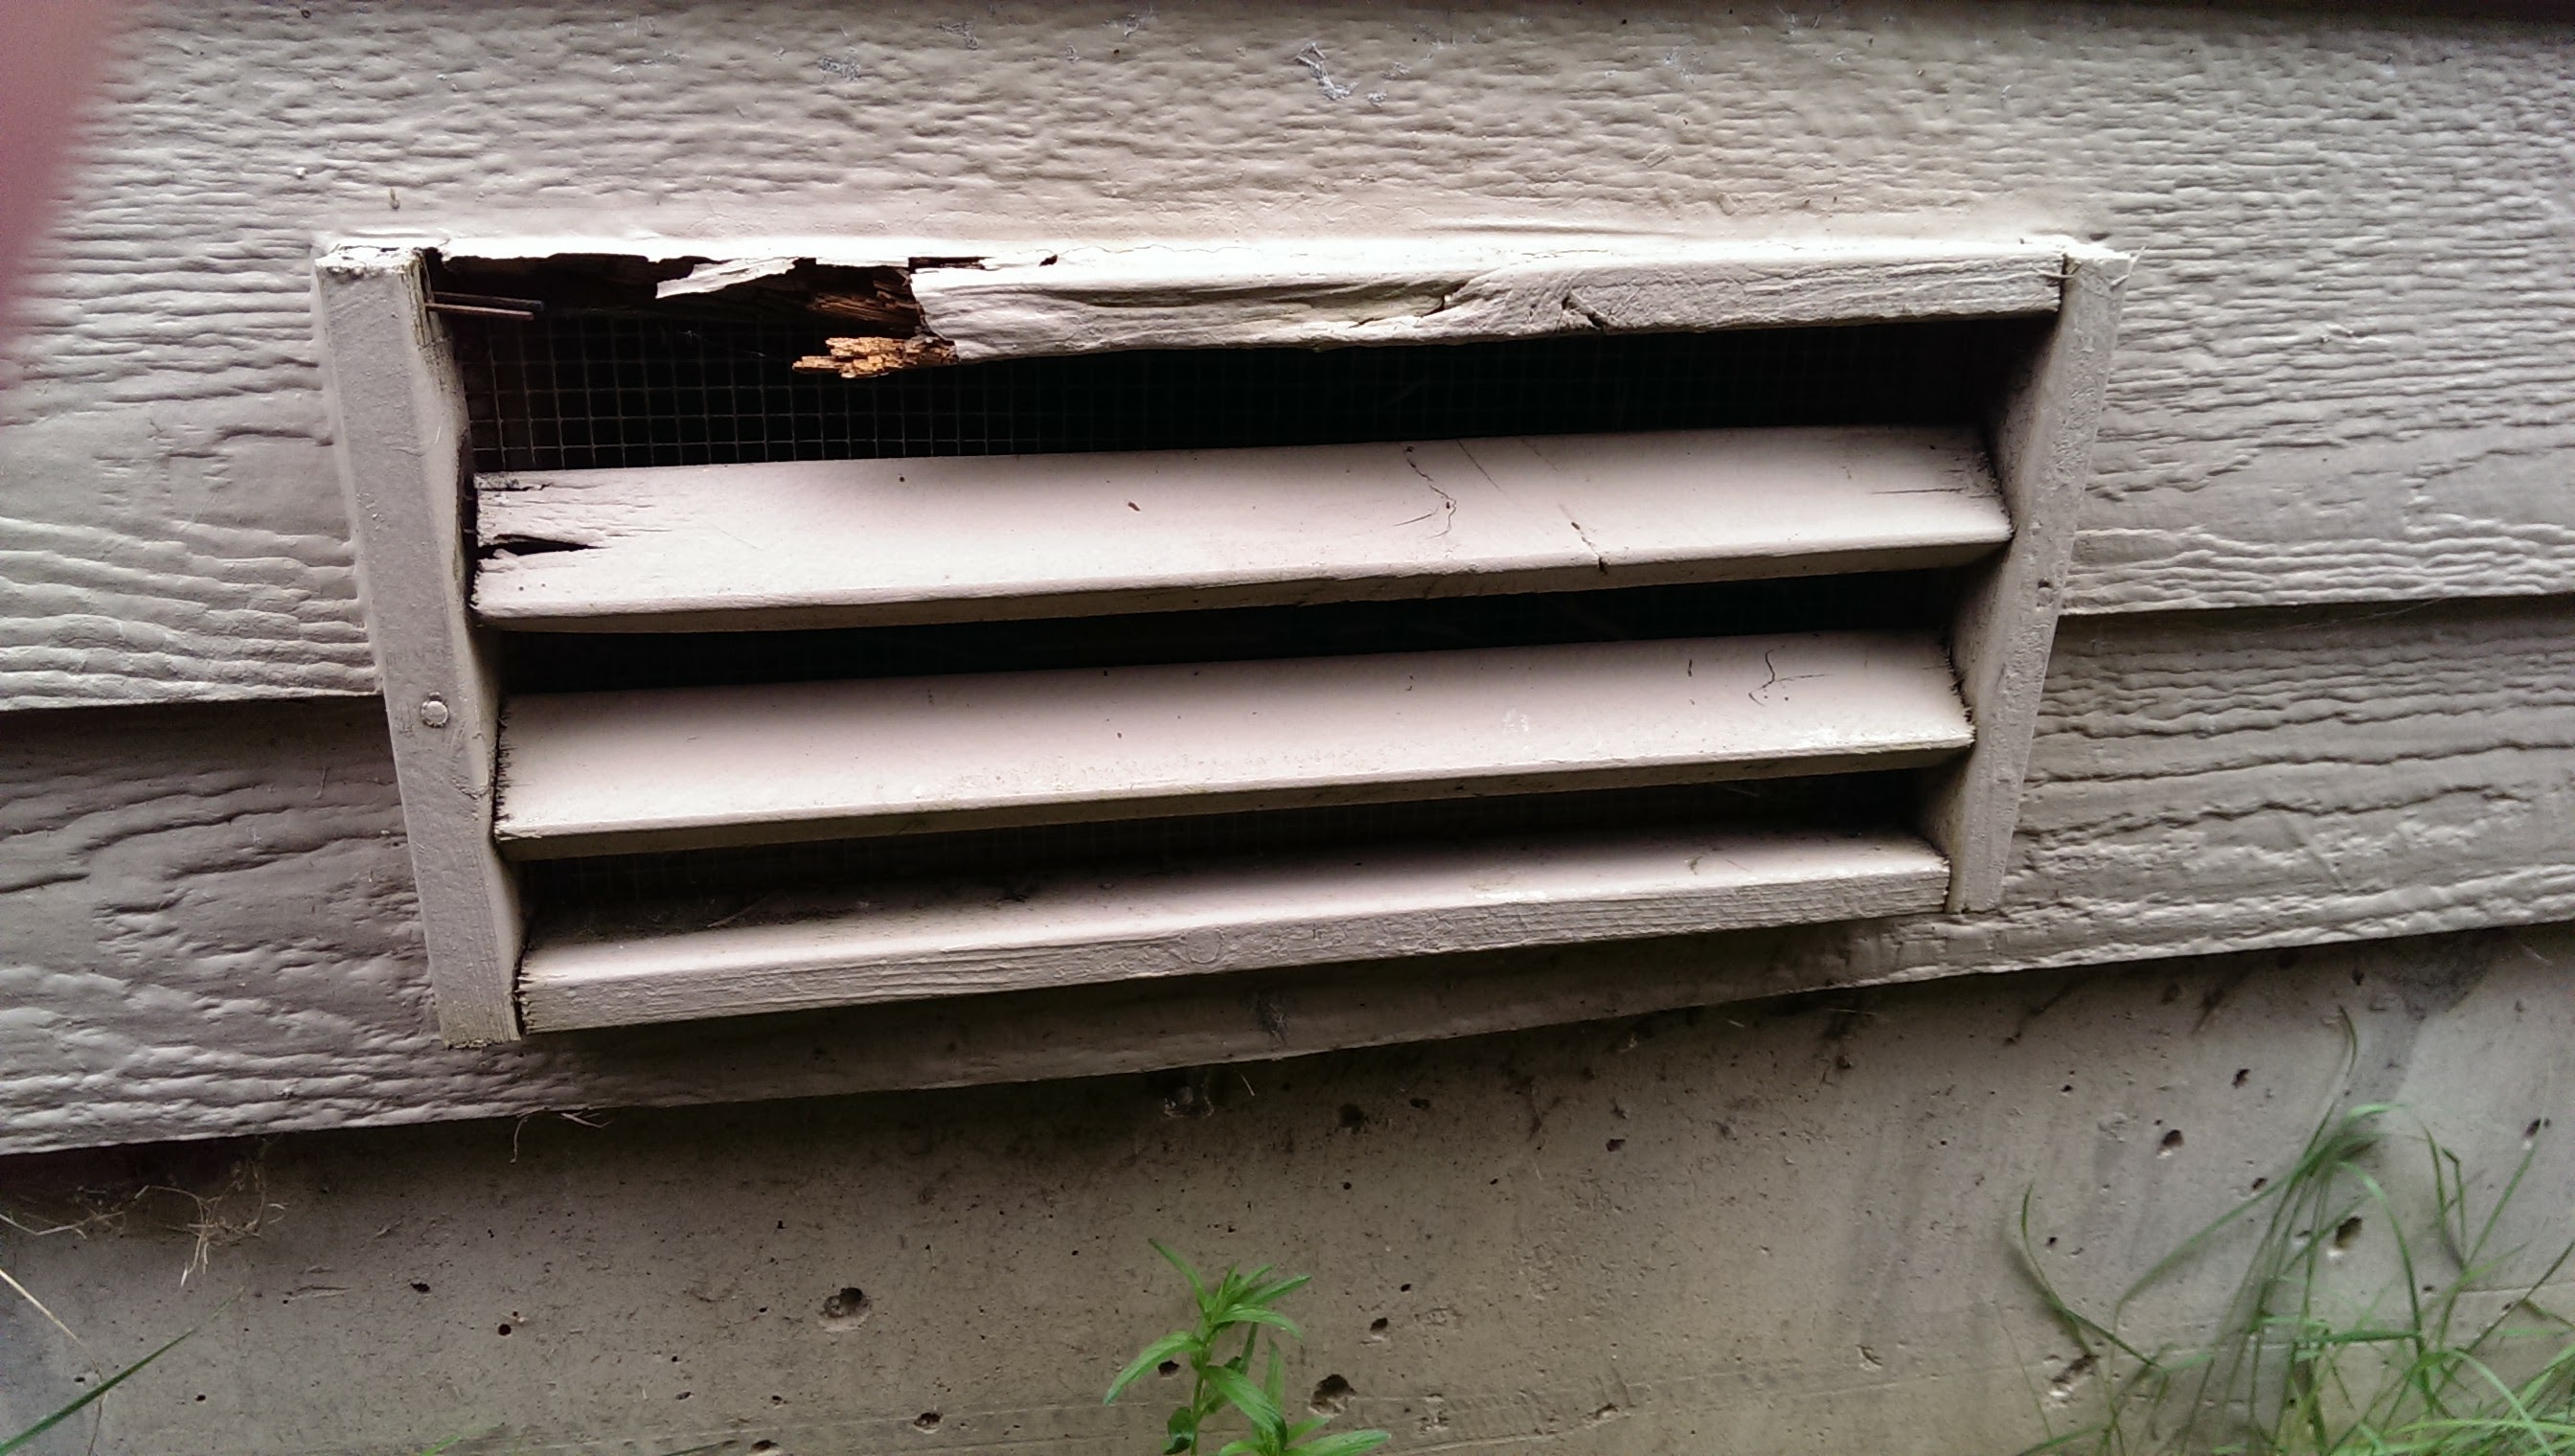 The Best Options To Cover Your Crawl Space Vents